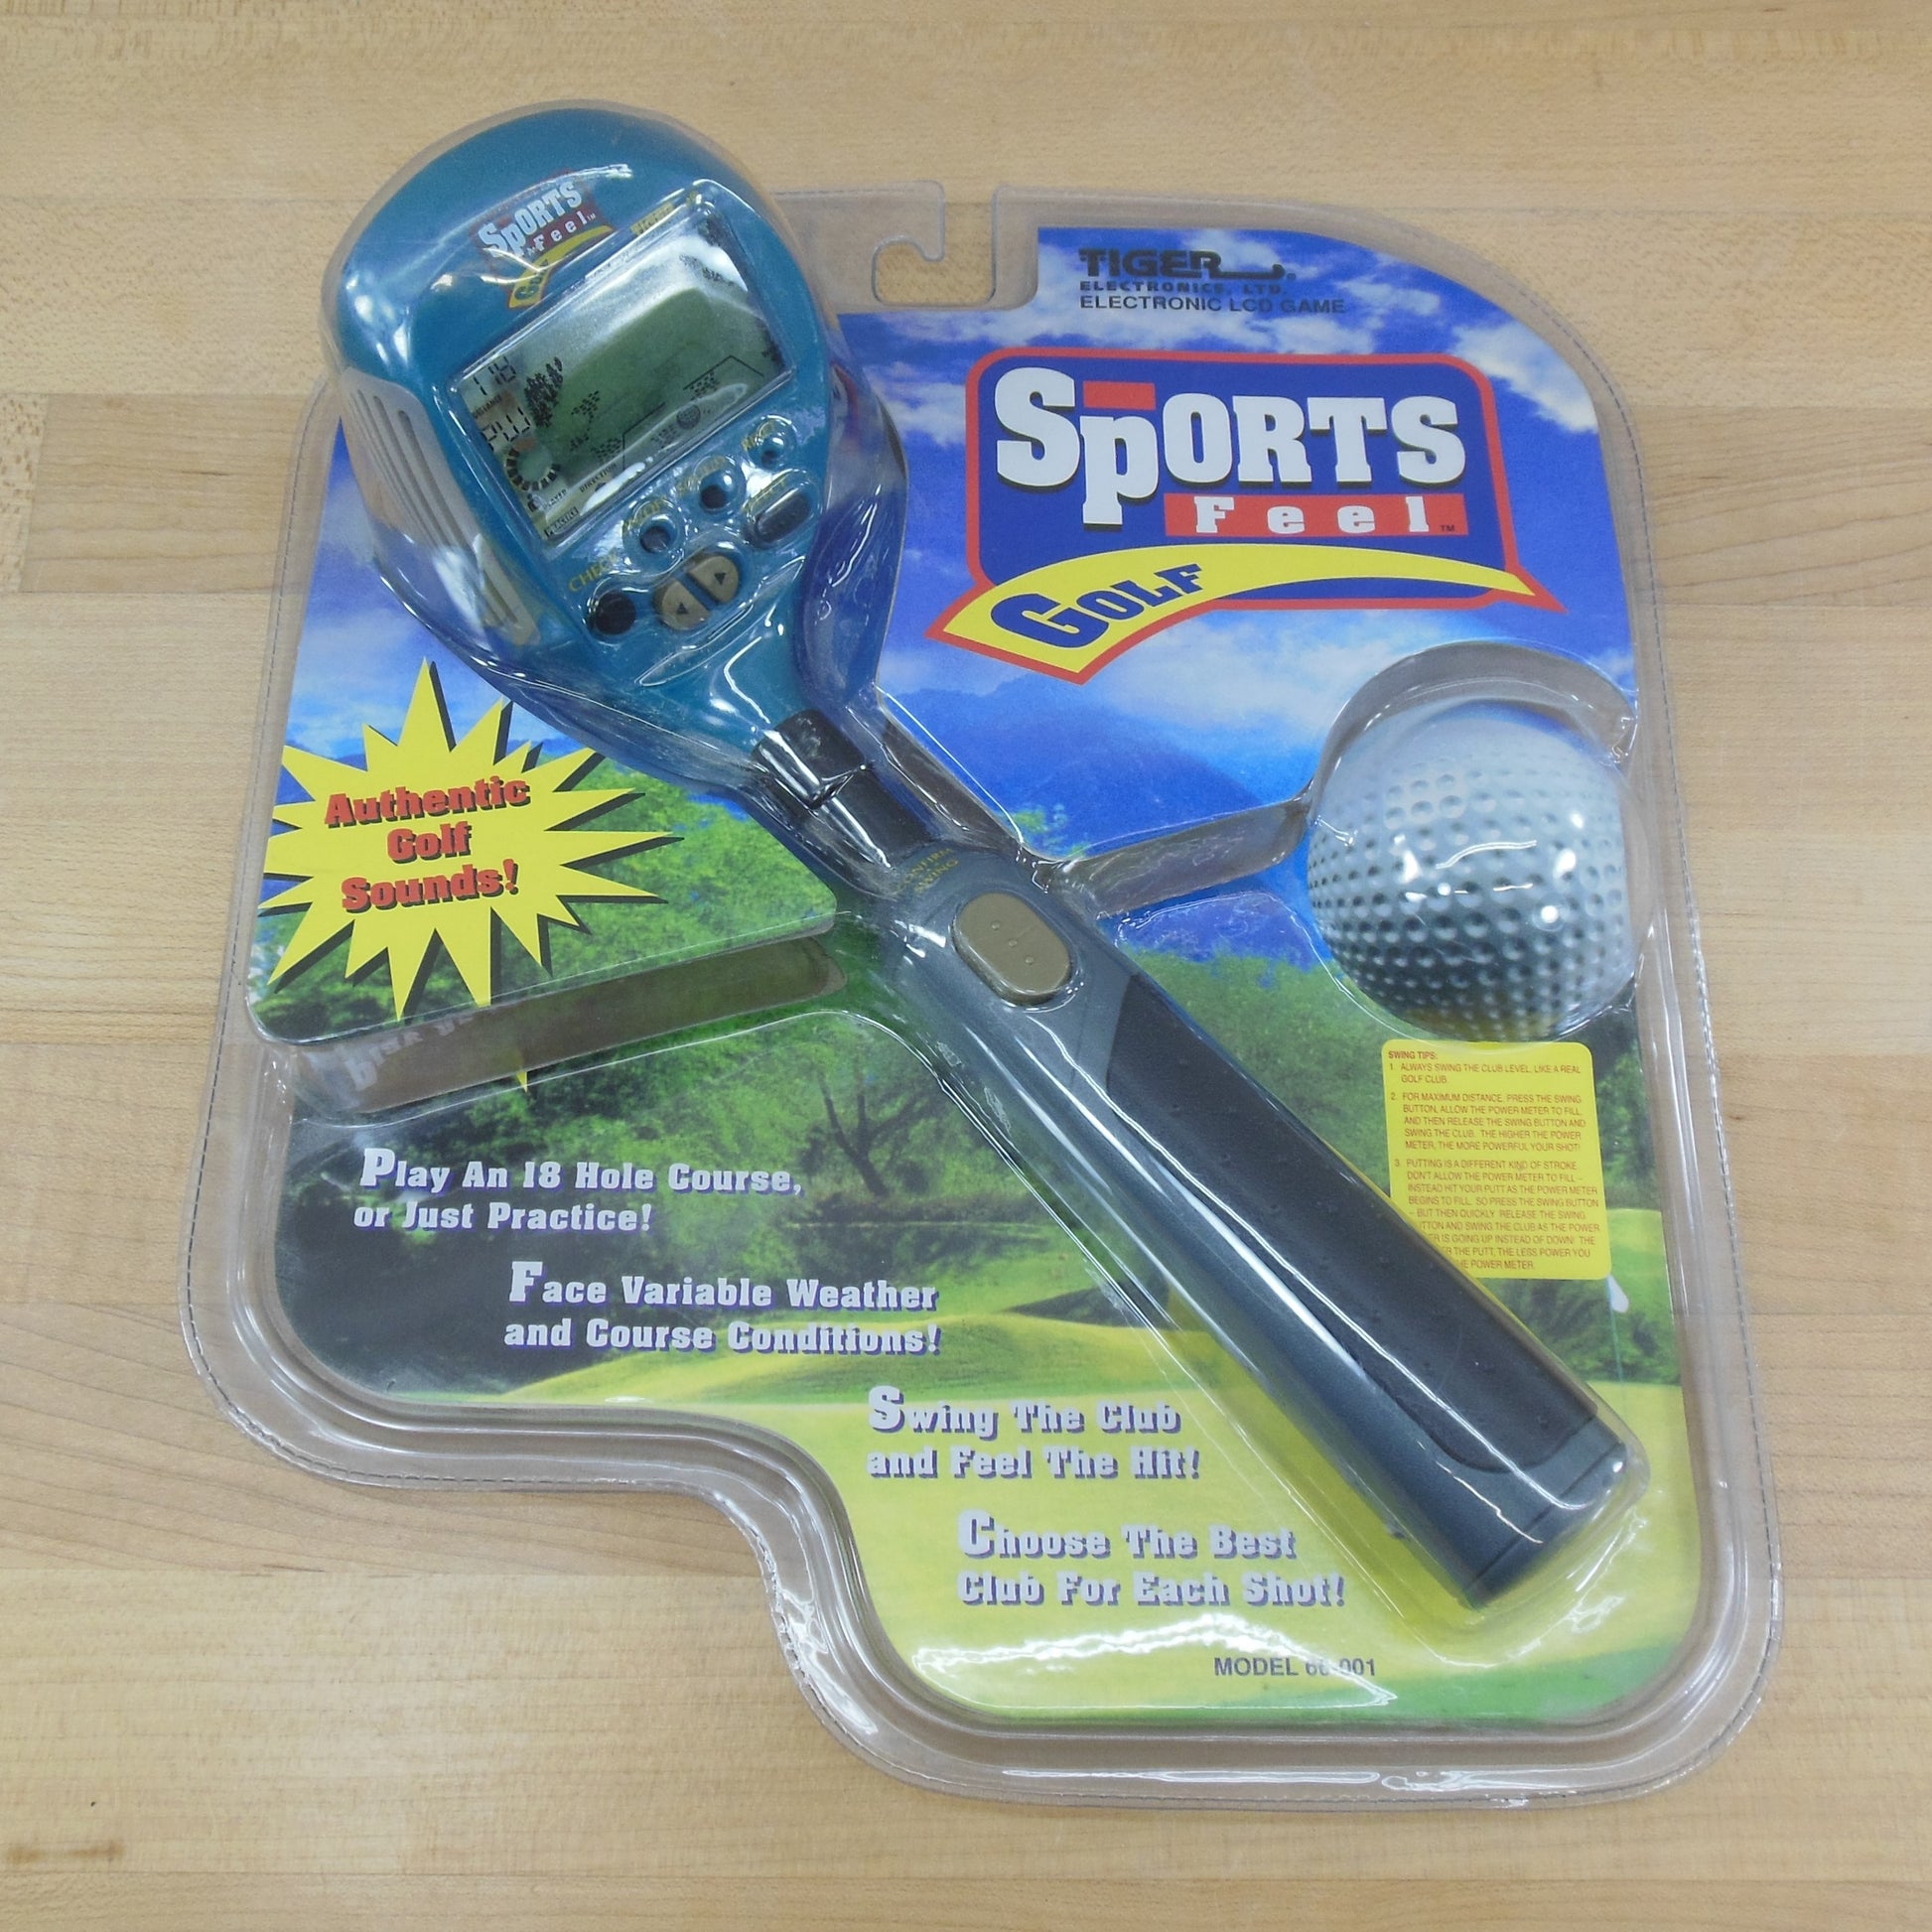 Tiger Electronics 1998 Sports Feel Game Sealed Package New